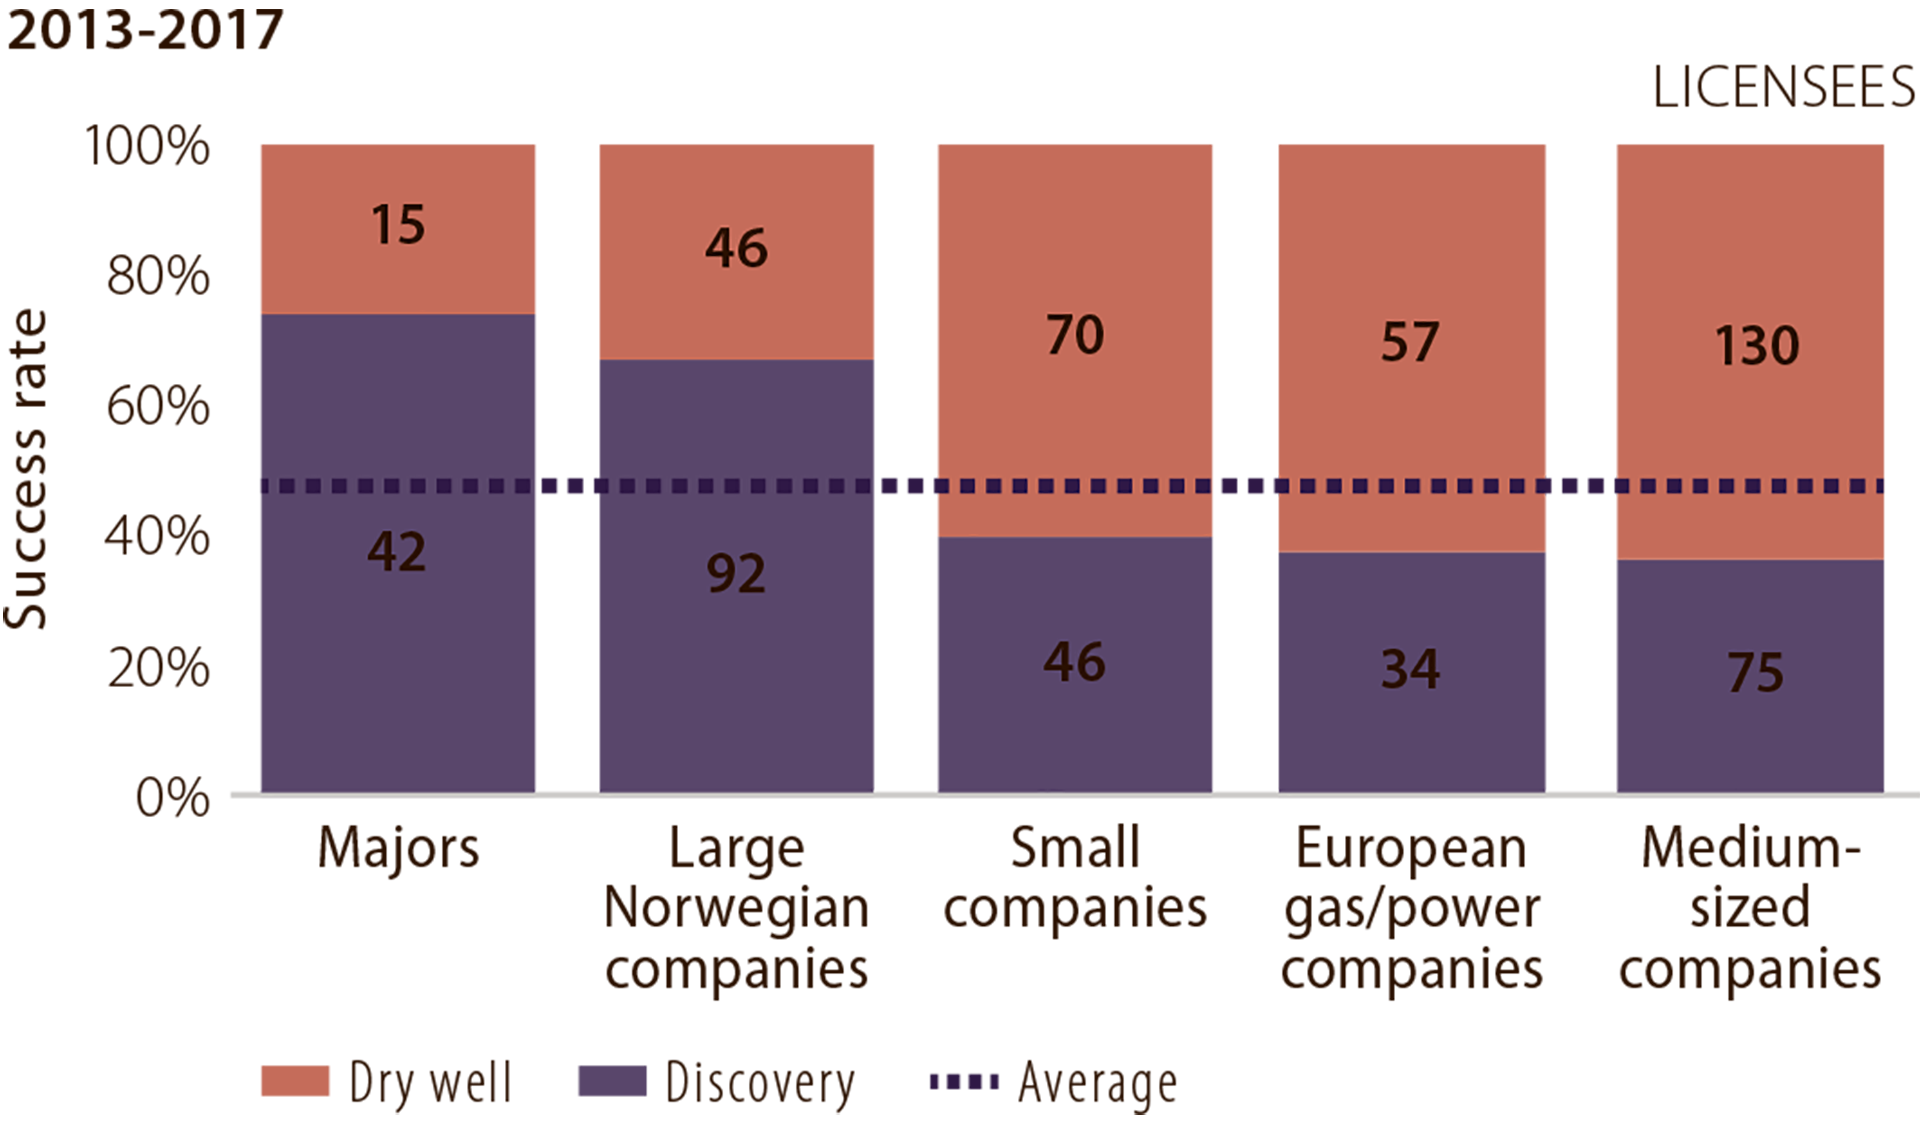 Figure 5.11 Success rate in 2013-17 by company category (licensees).